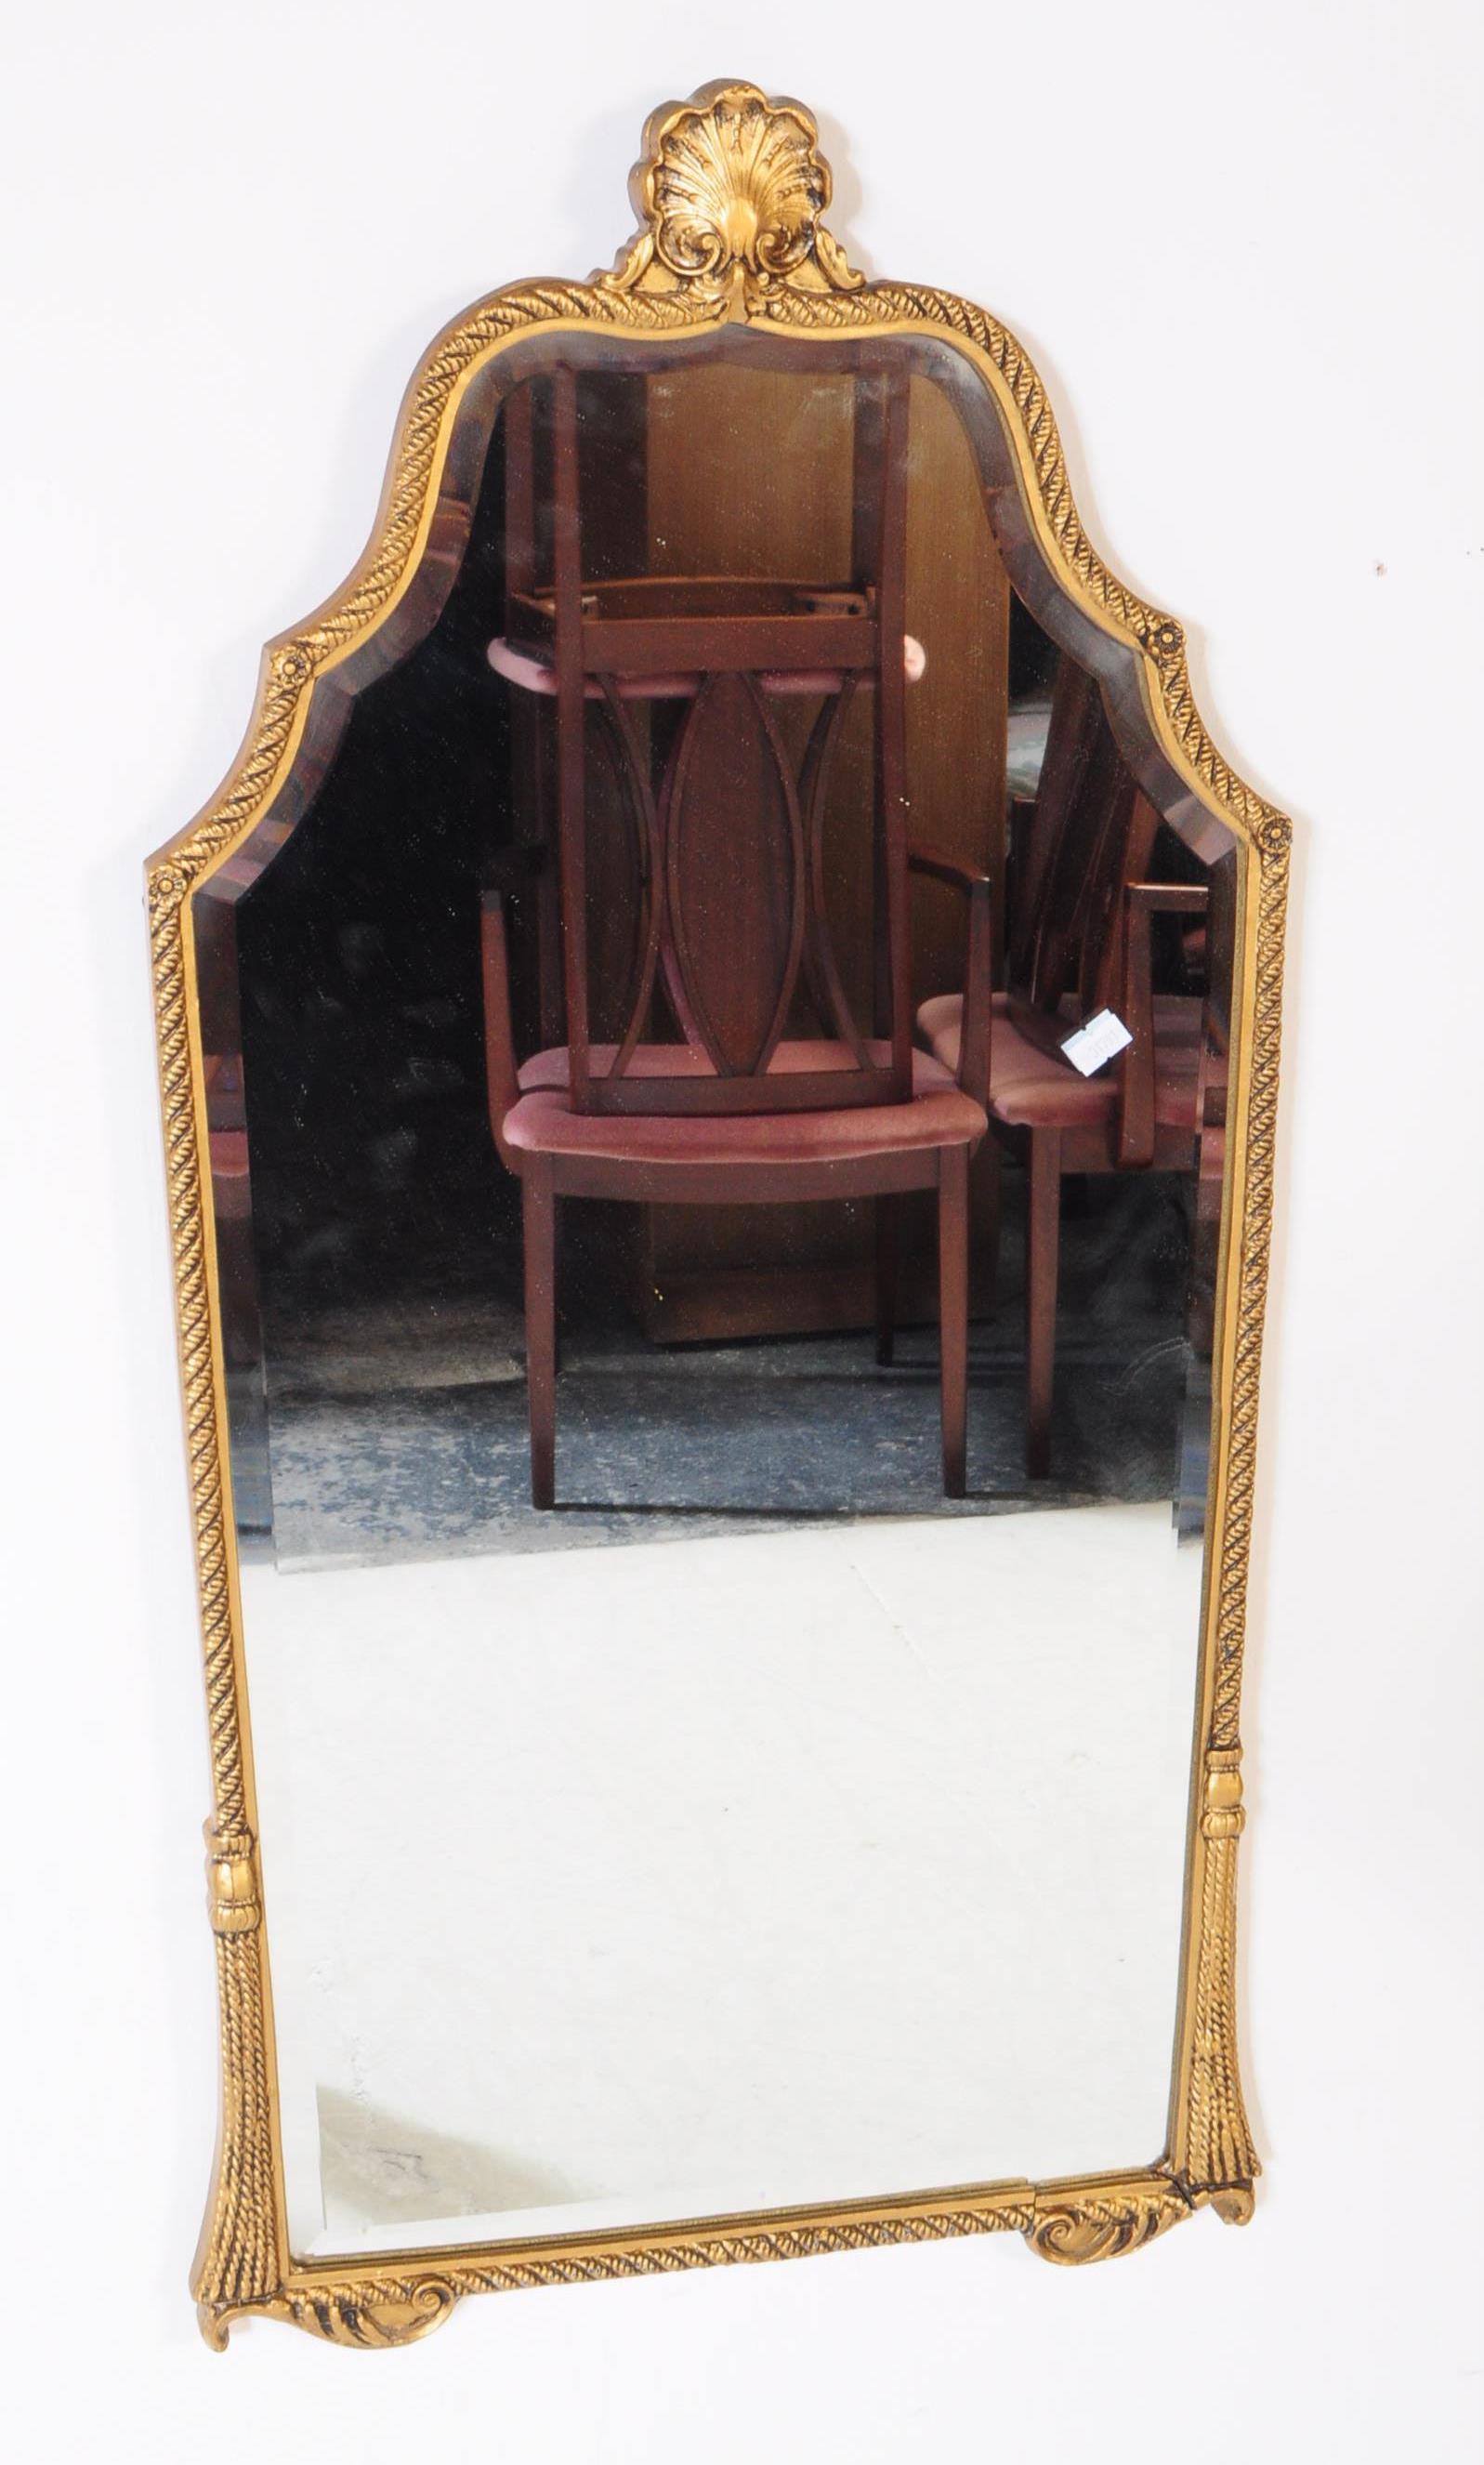 TWO VINTAGE 20TH CENTURY ORNATE GILT FRAME WALL MIRRORS - Image 2 of 7